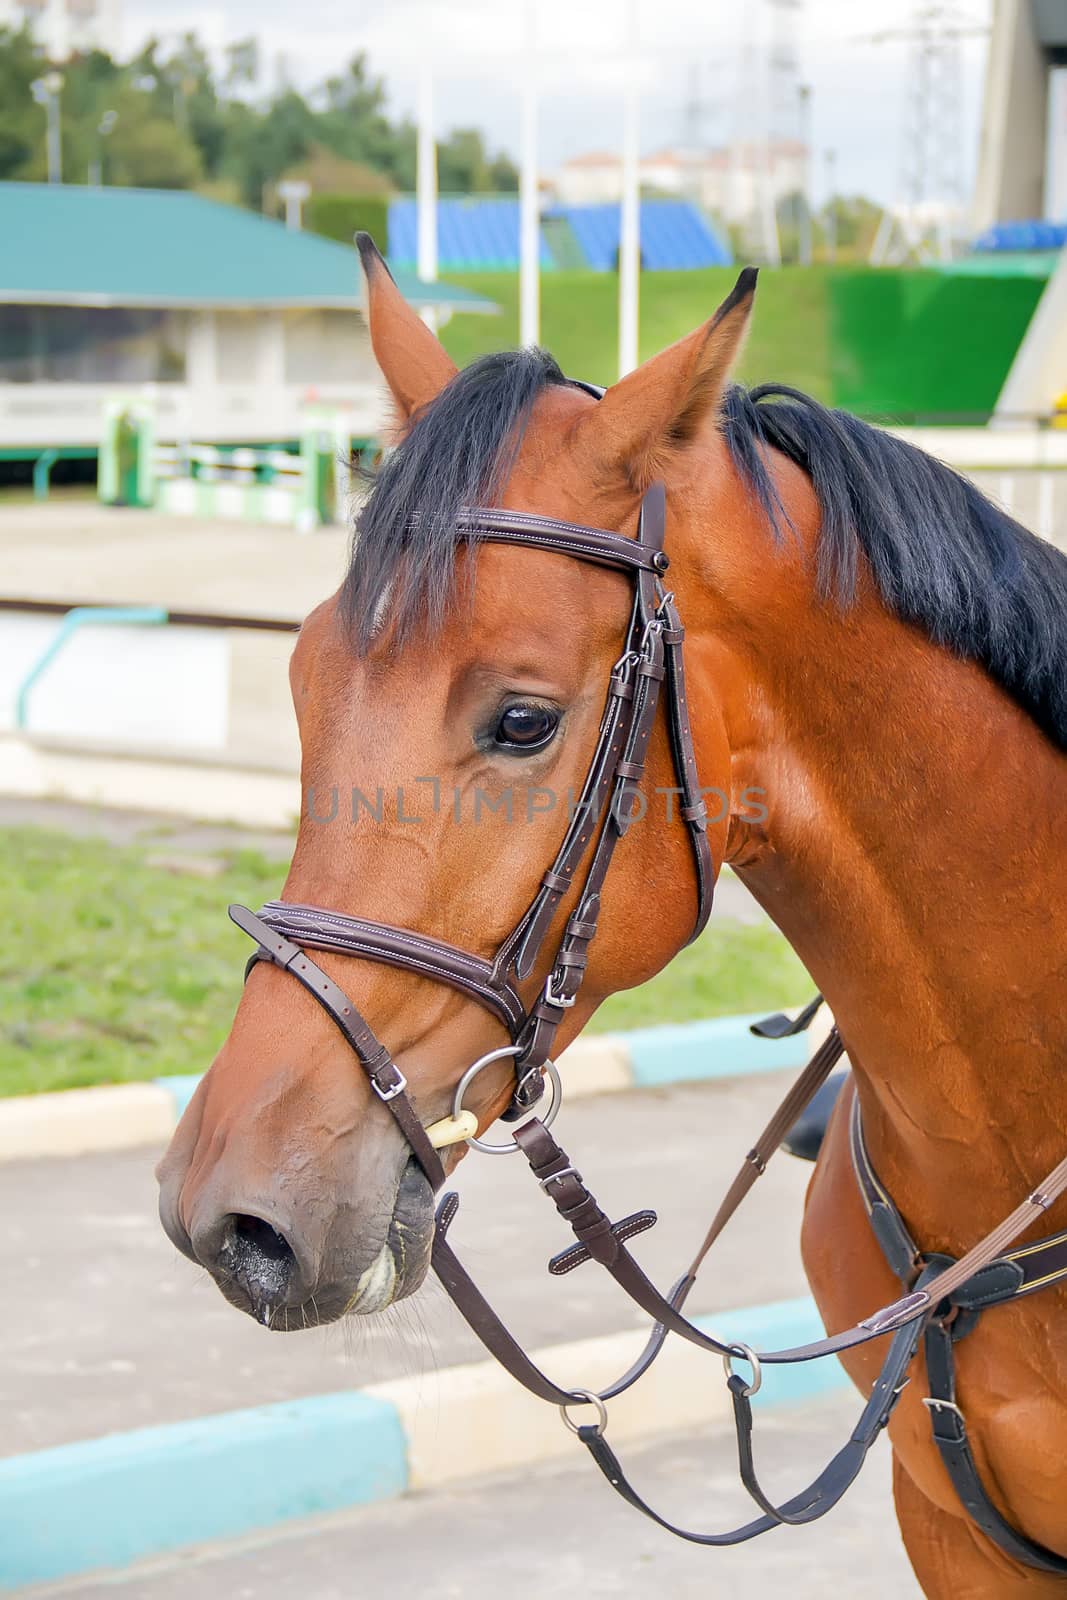 Hippodrome brown head horse in harness on the training field